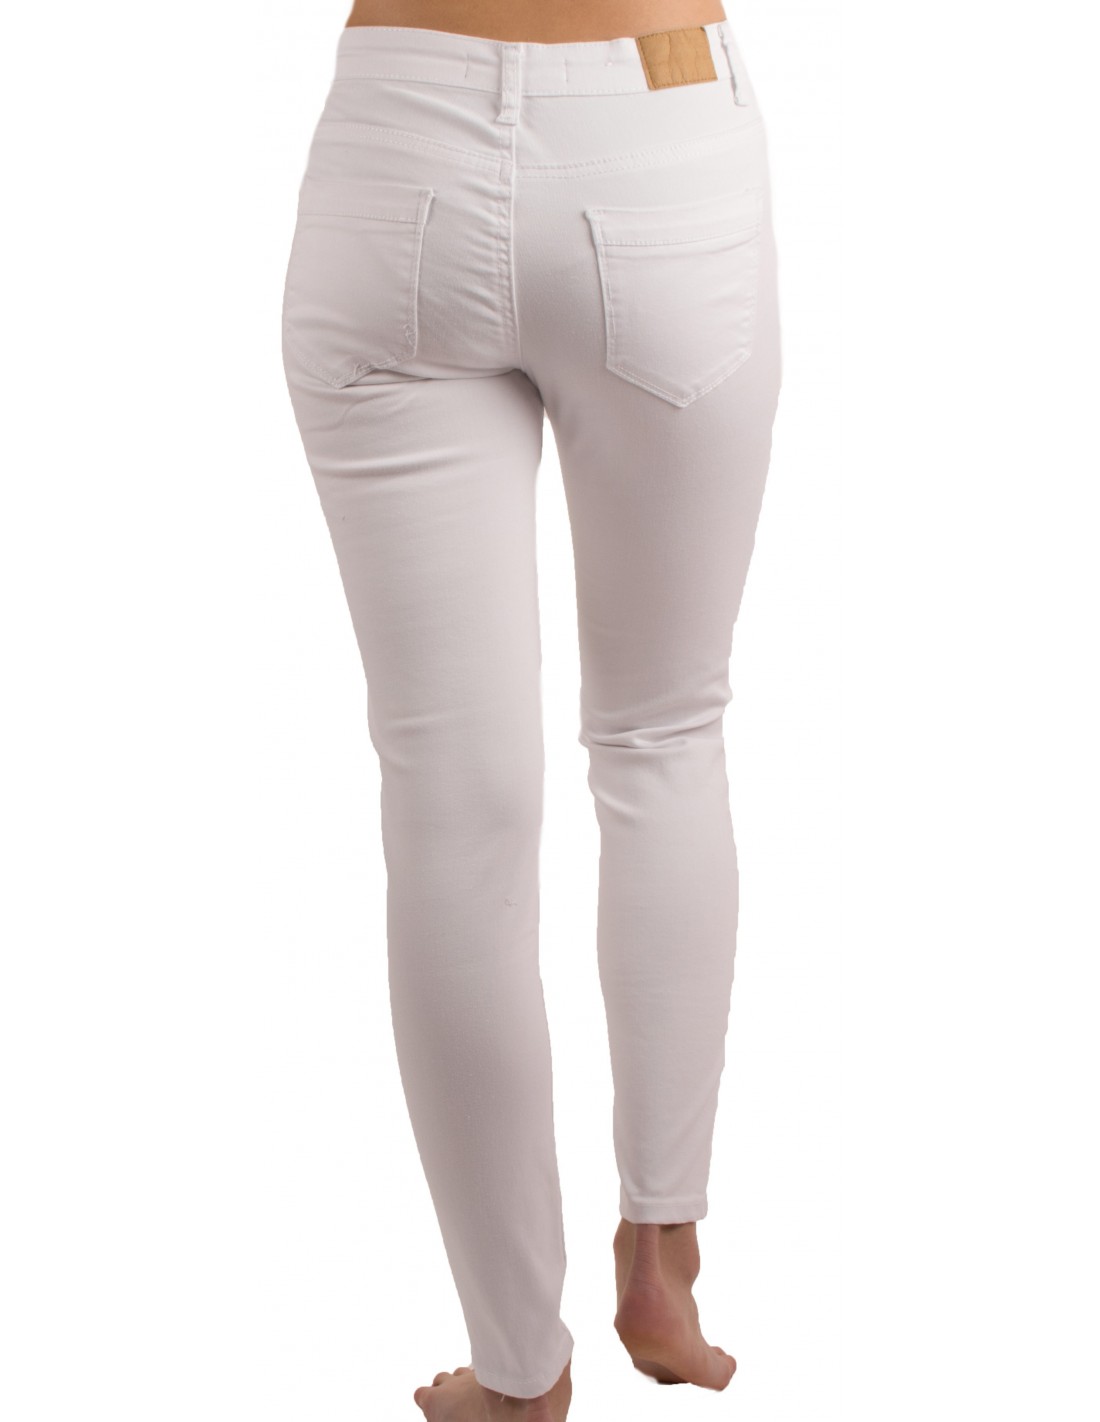 Jean femme blanc taille haute coupe slim ultra stretch - Jeaniful